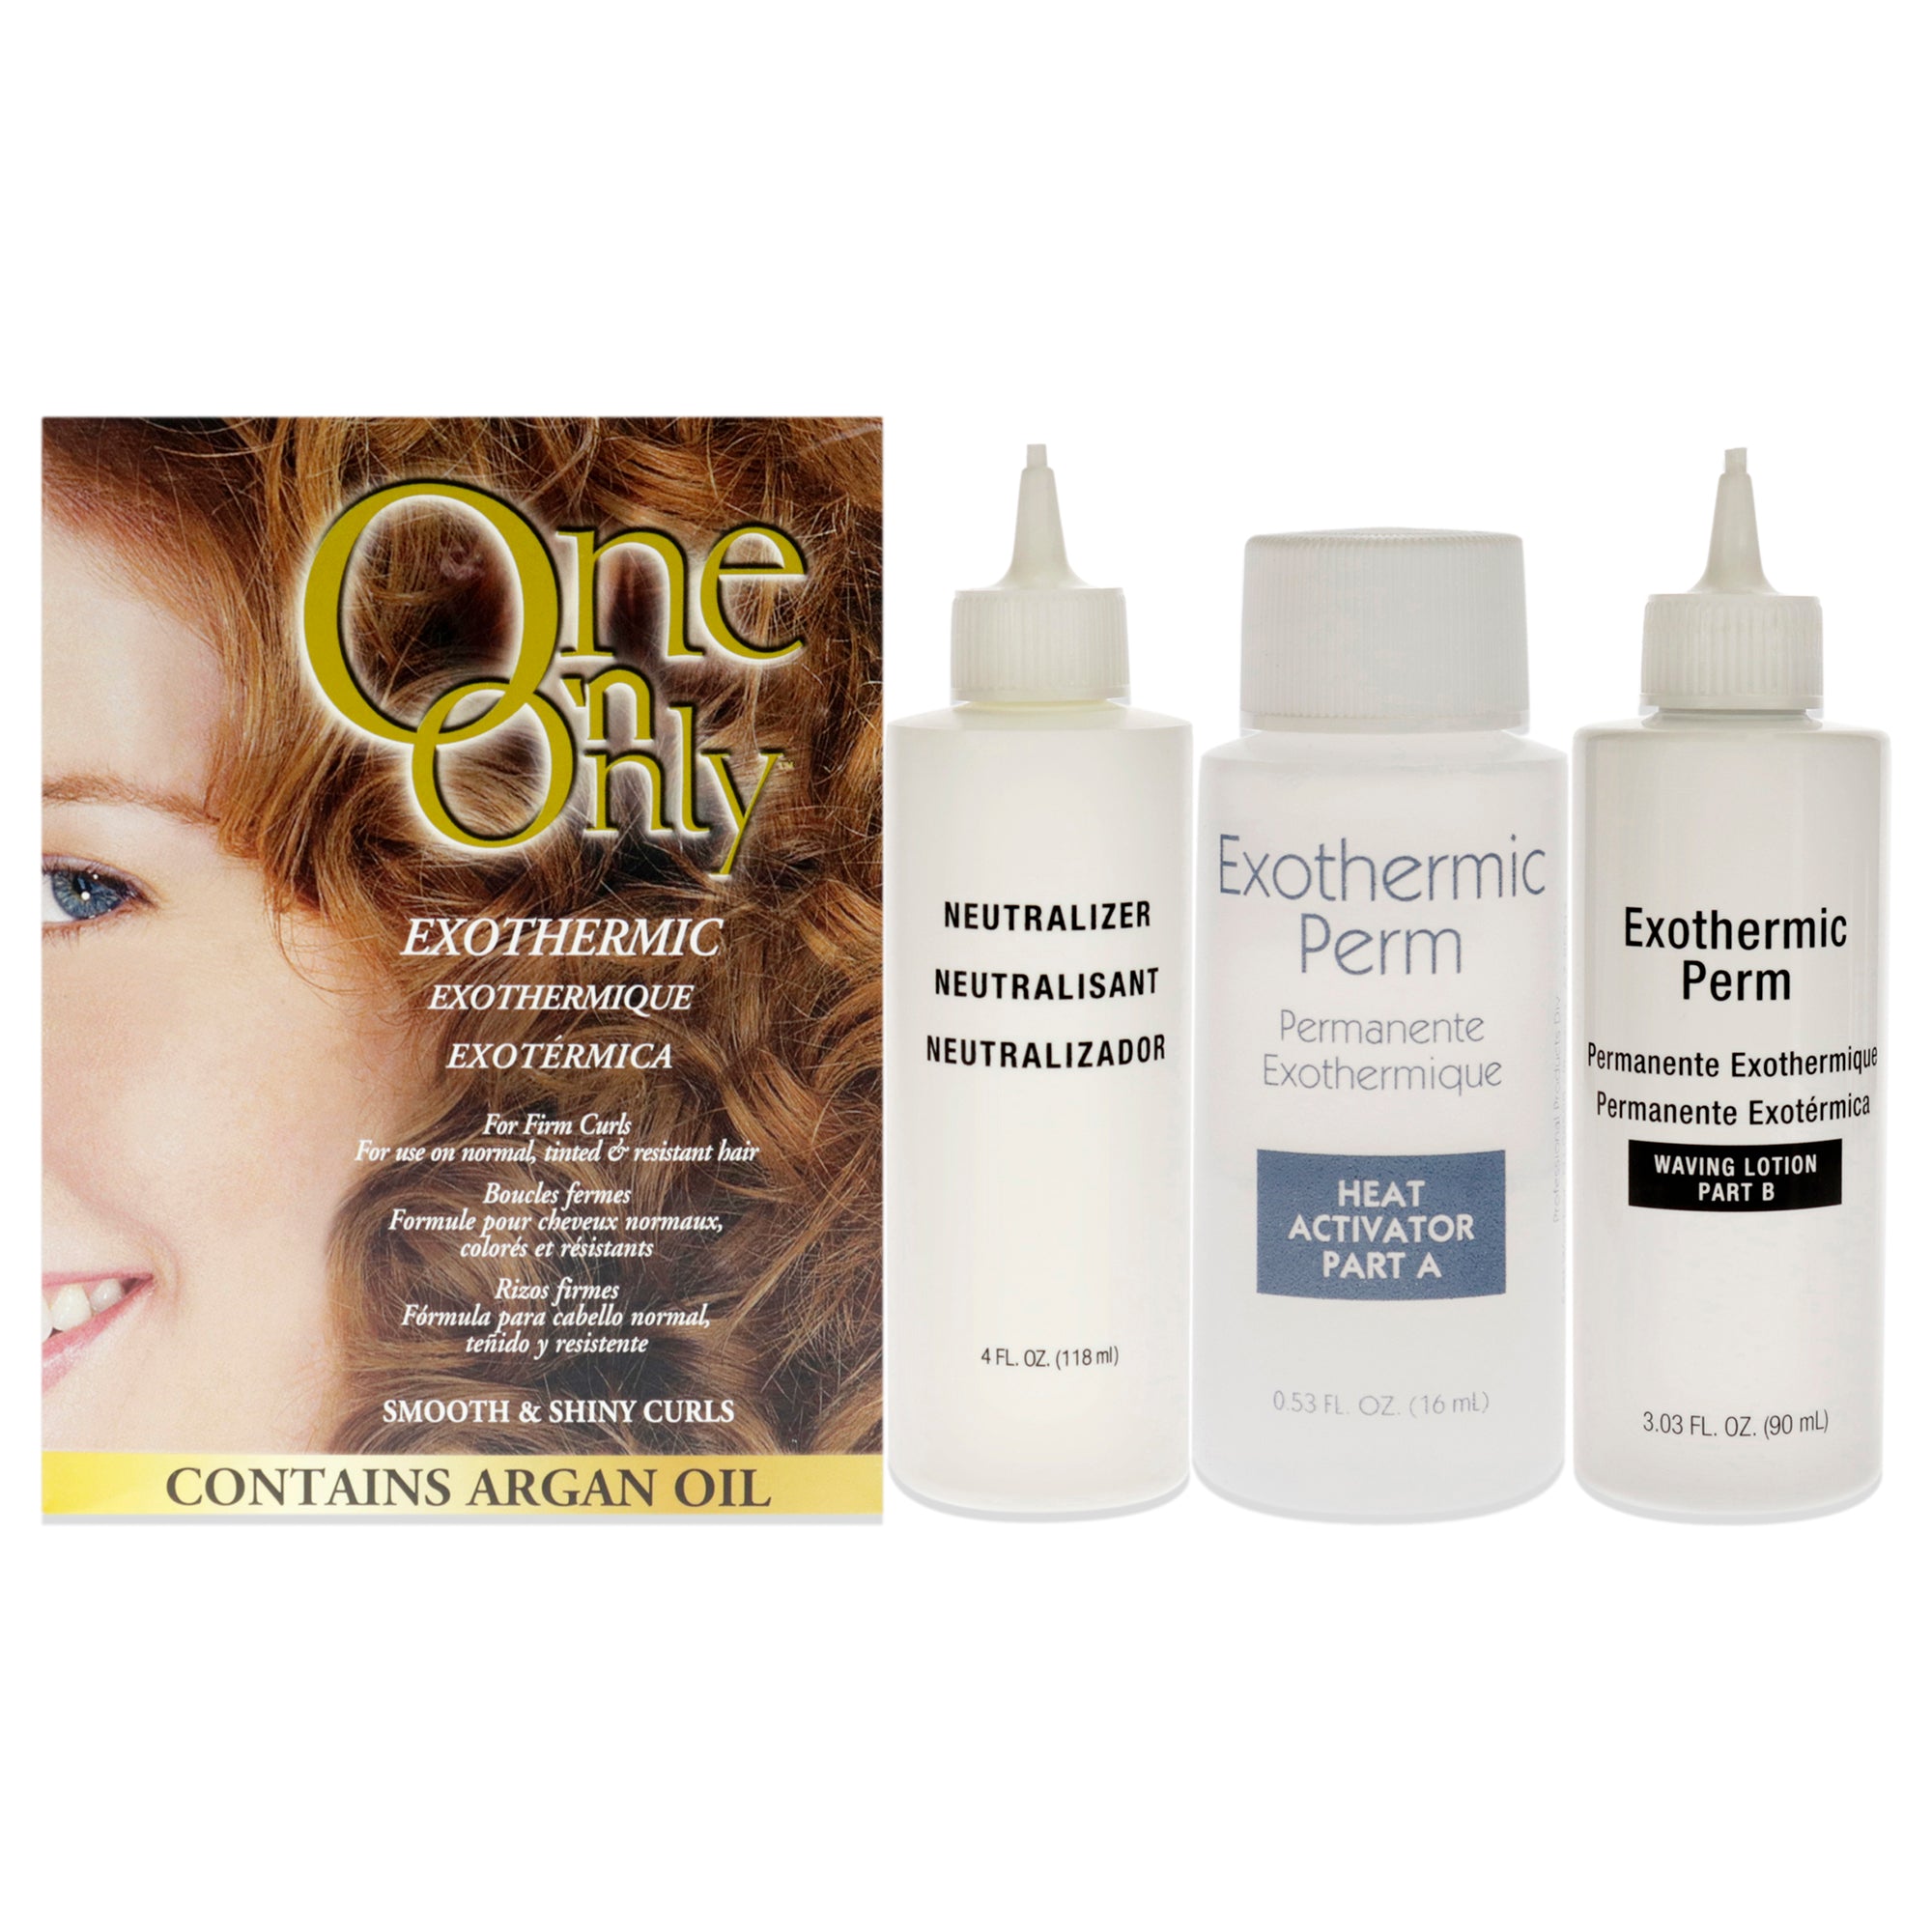 Exothermic Perm by One n Only for Unisex - 1 Pc Treatment